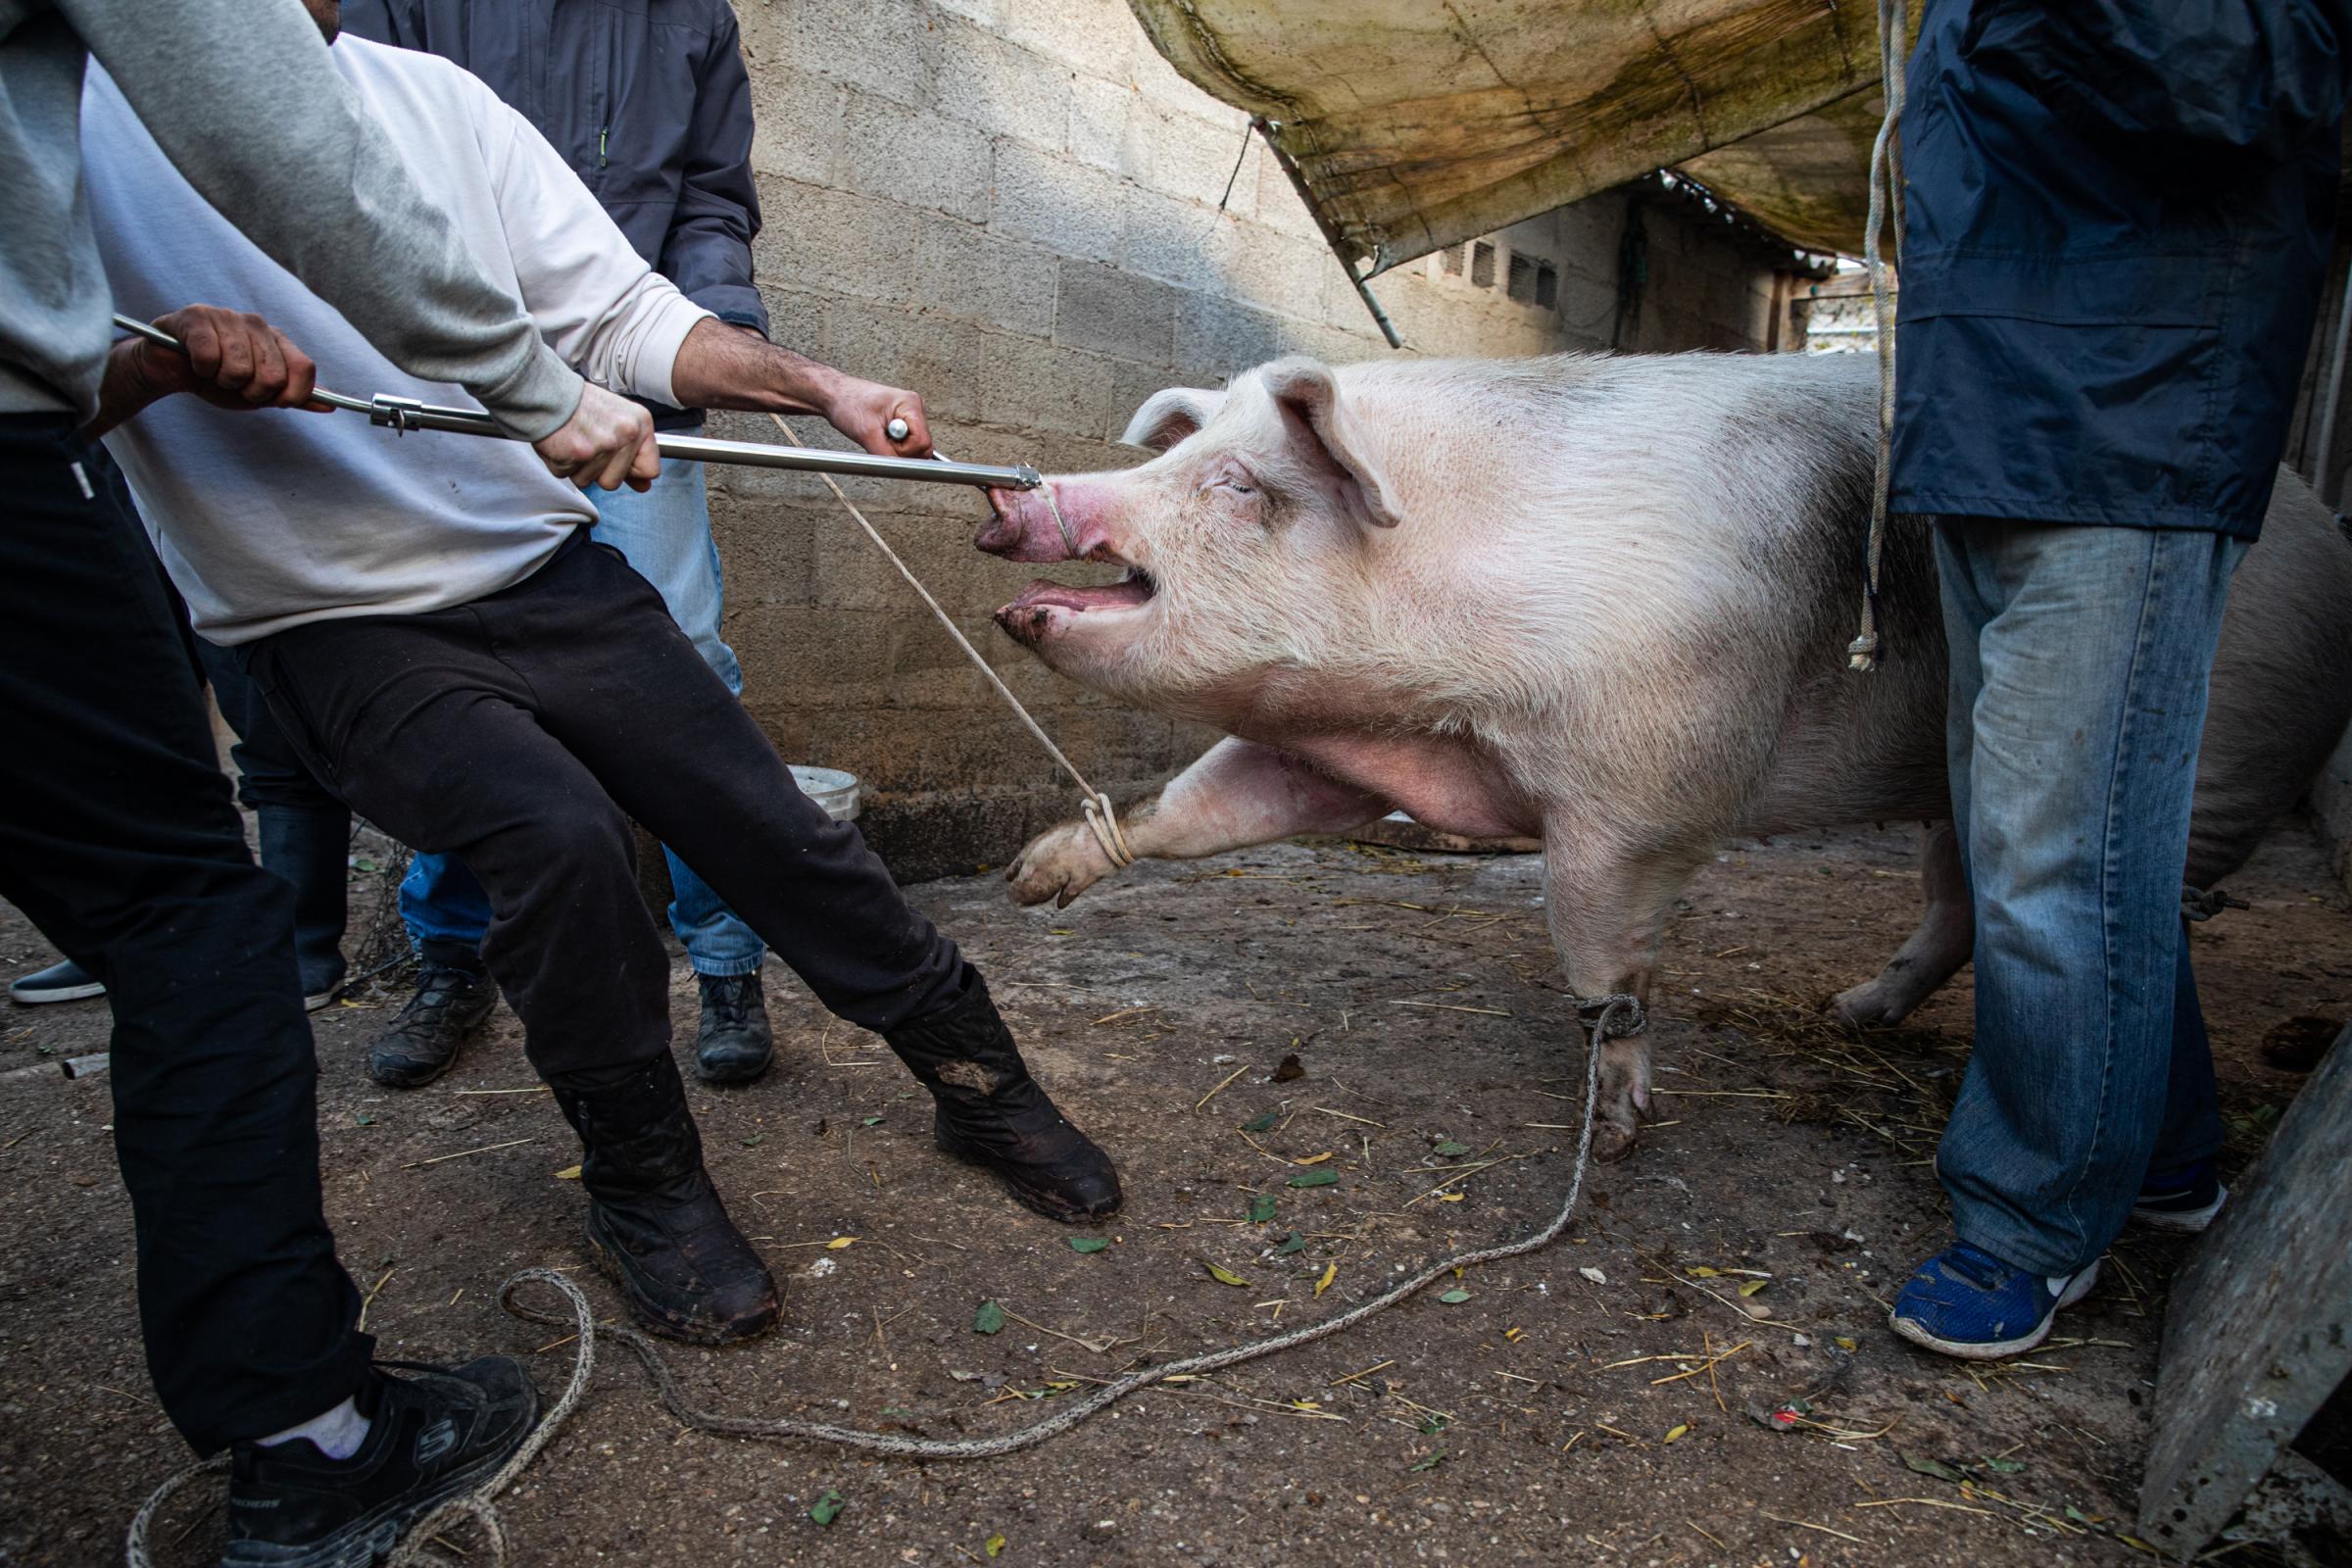 Spain's Sustainable Swine Slaughtering For Prized Iberian  - IBIZA, SPAIN - DECEMBER 06: The owner of the farm takes...